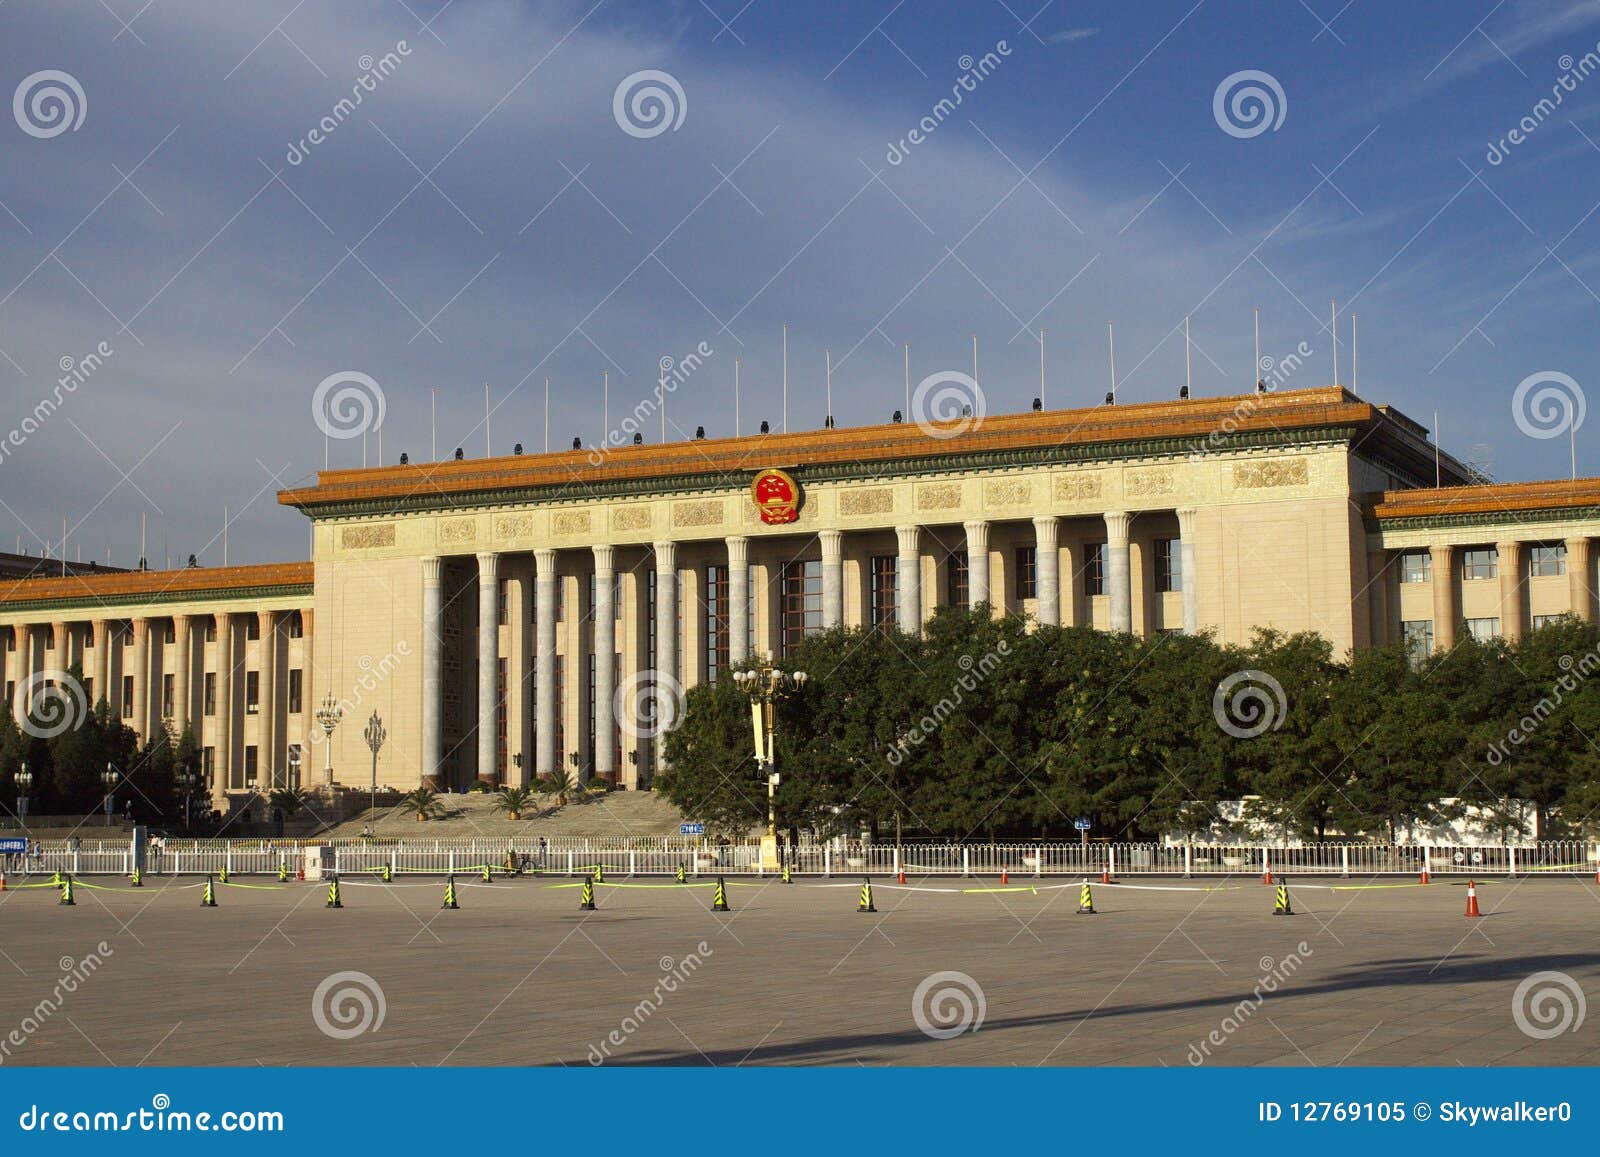 The Great Hall of the People, beijing, the People s Republic of China